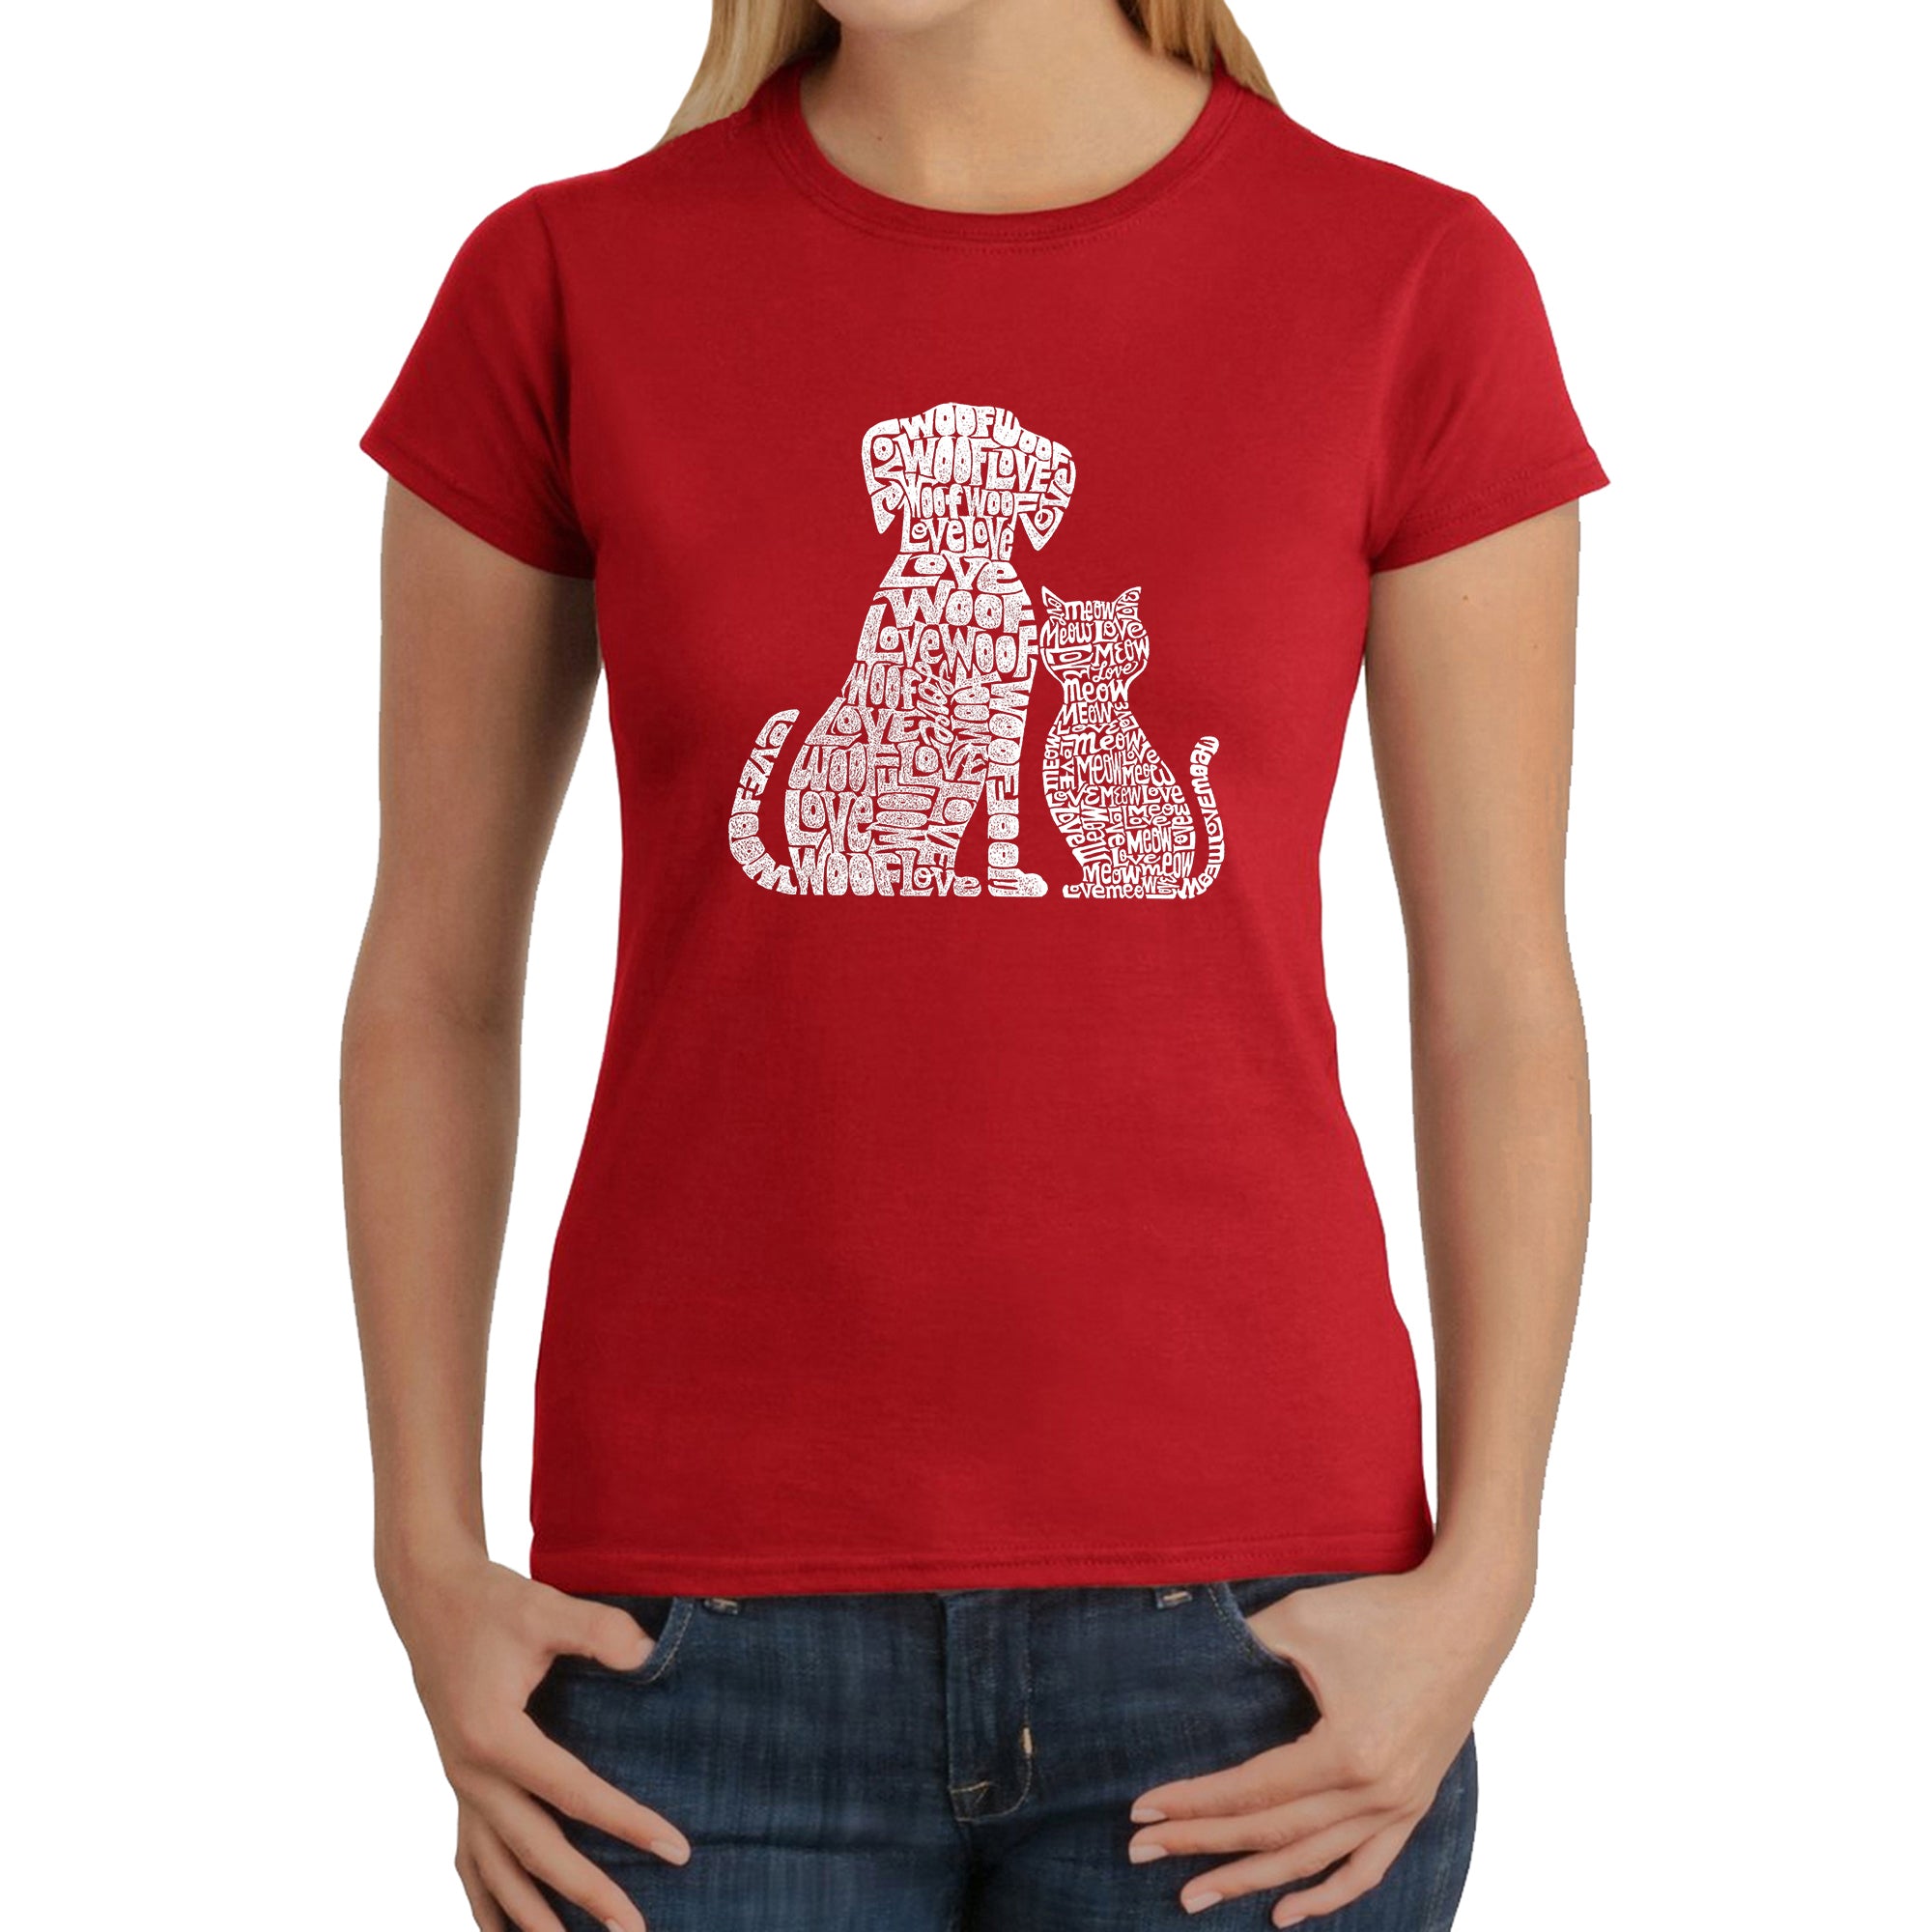 Dogs And Cats - Women's Word Art T-Shirt - Red - Large